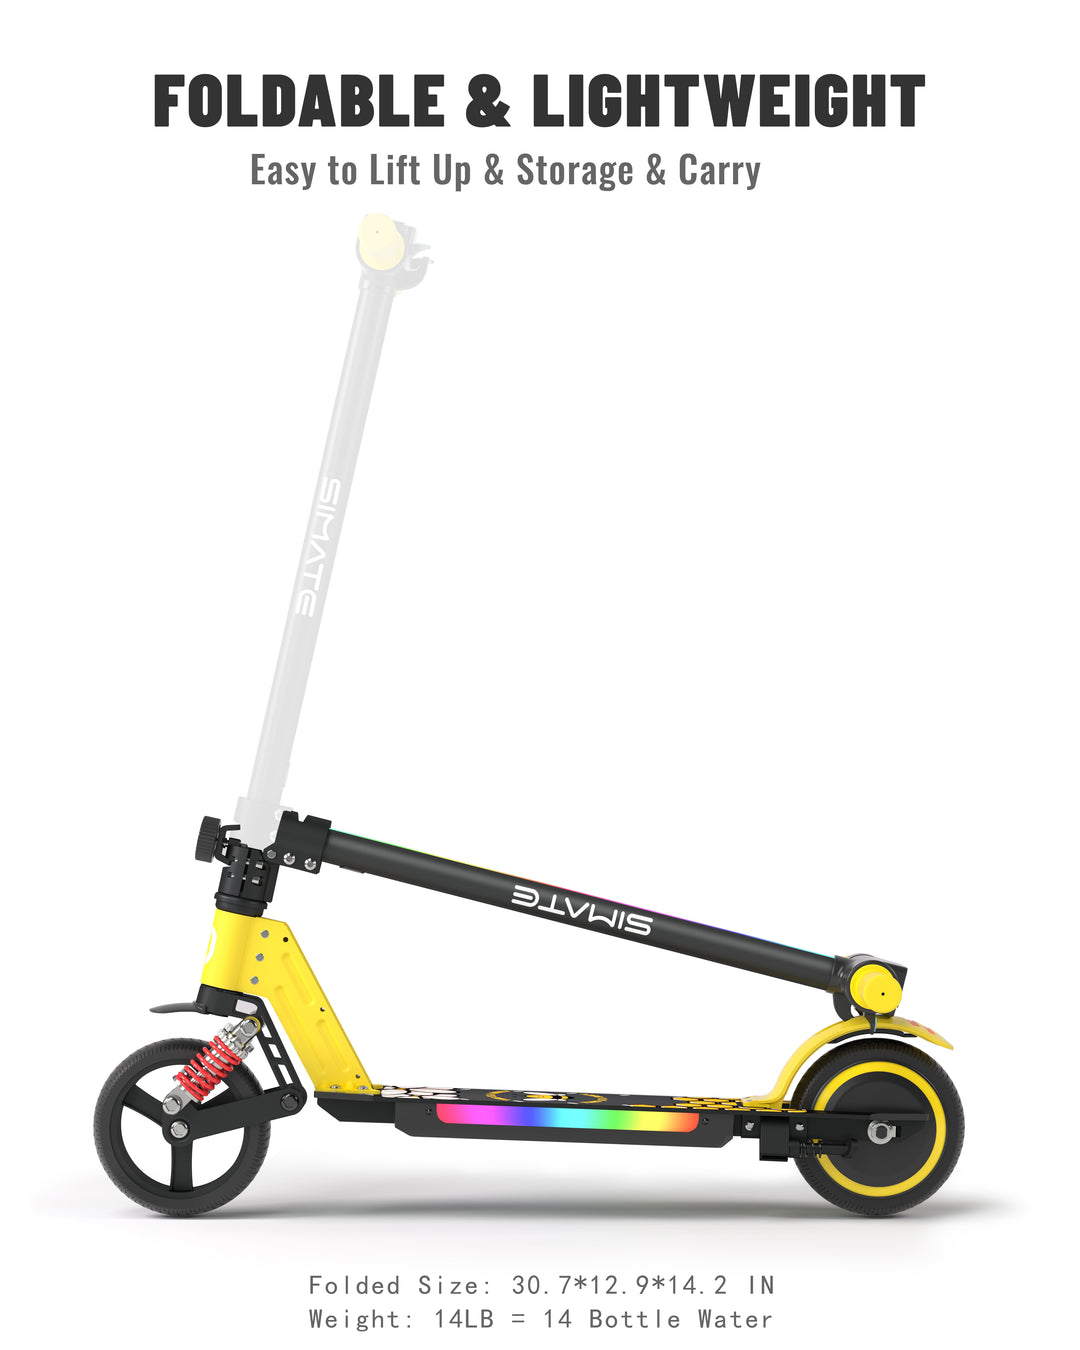 S5 Colorful Headlight Electric Scooter for Kids | Yellow